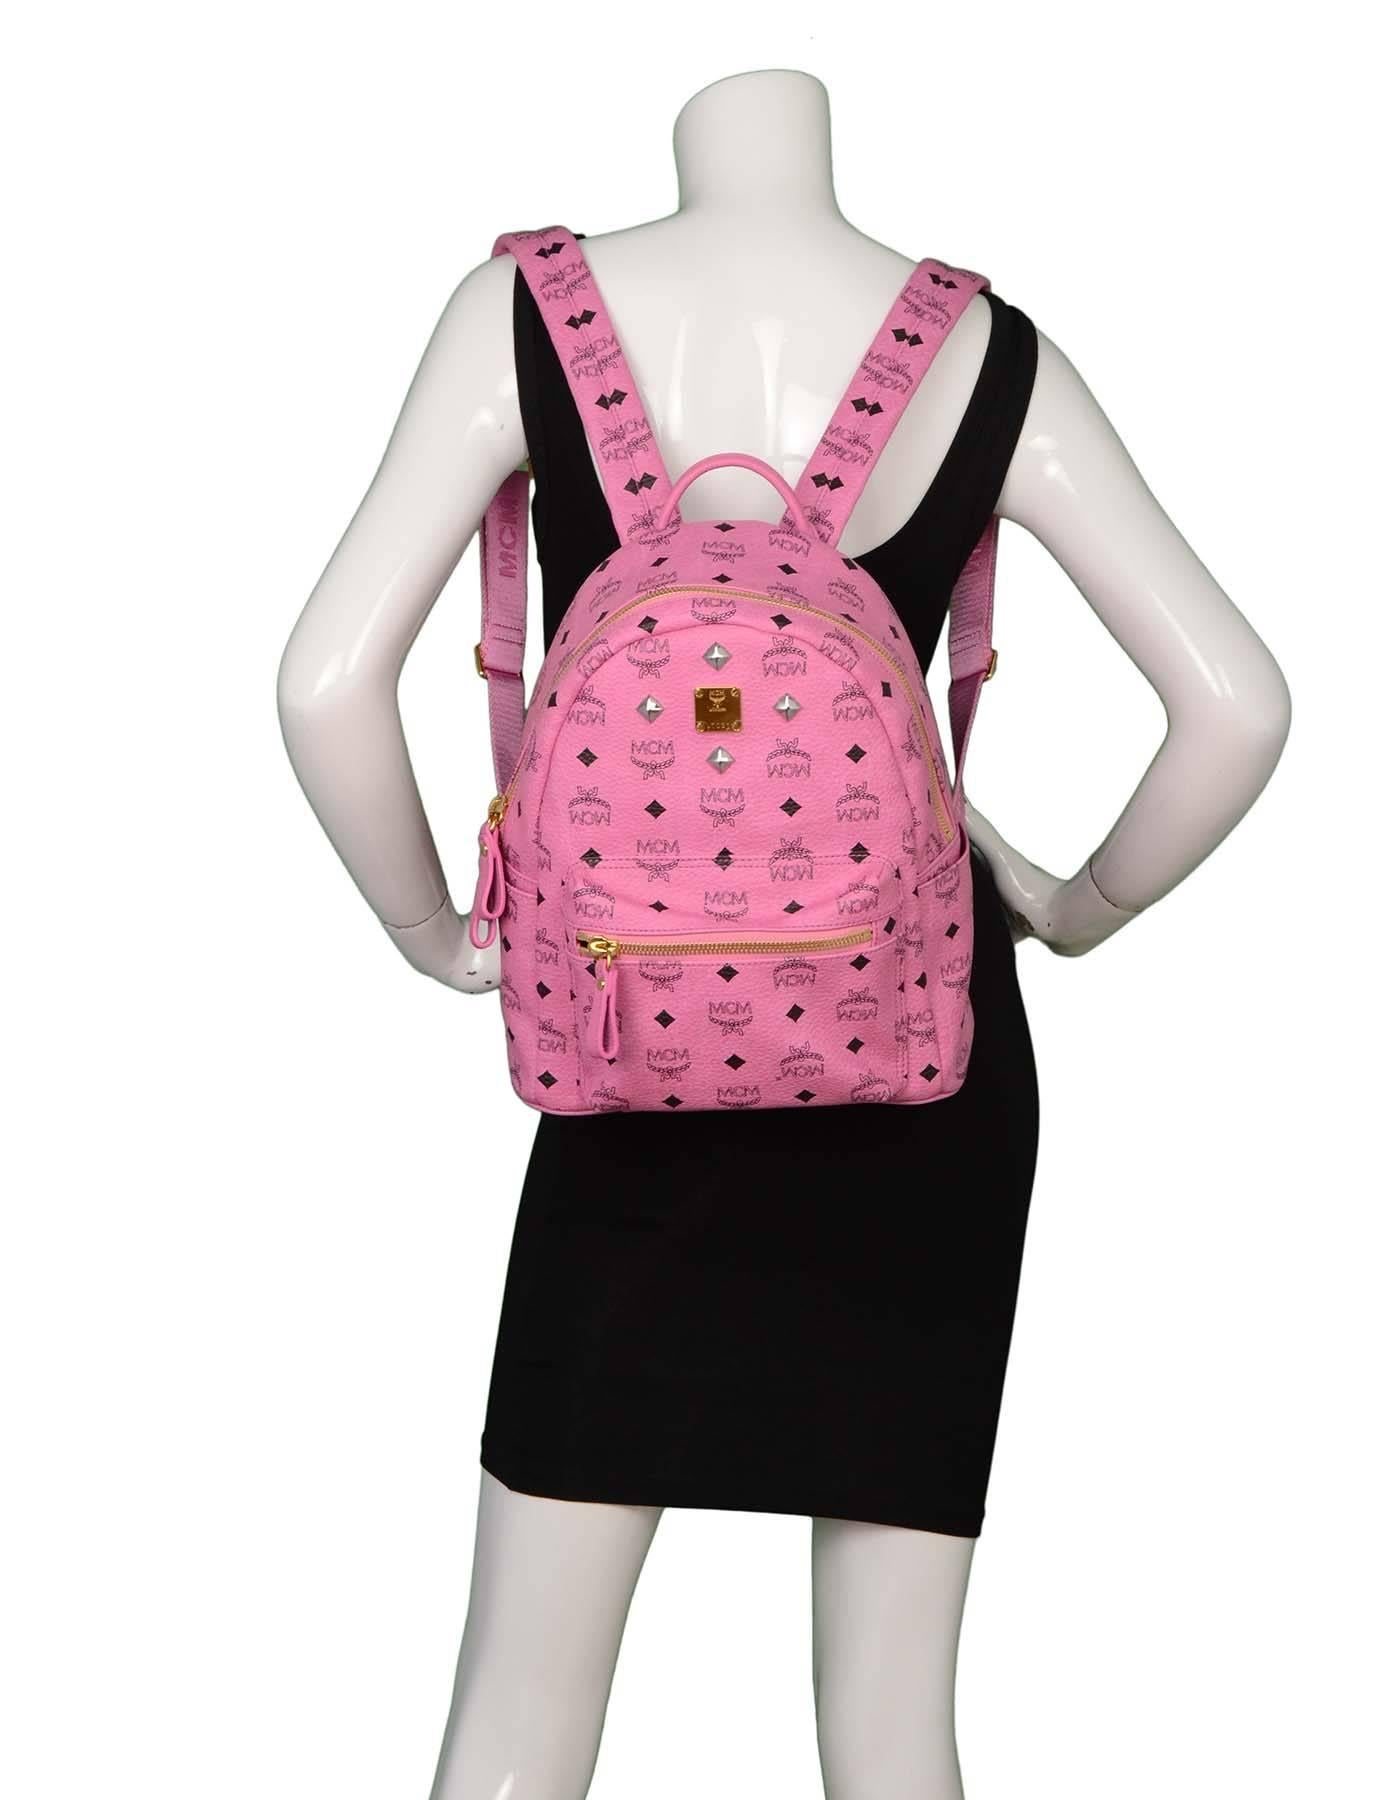 MCM Pink Leather Studded Backpack GHW 2